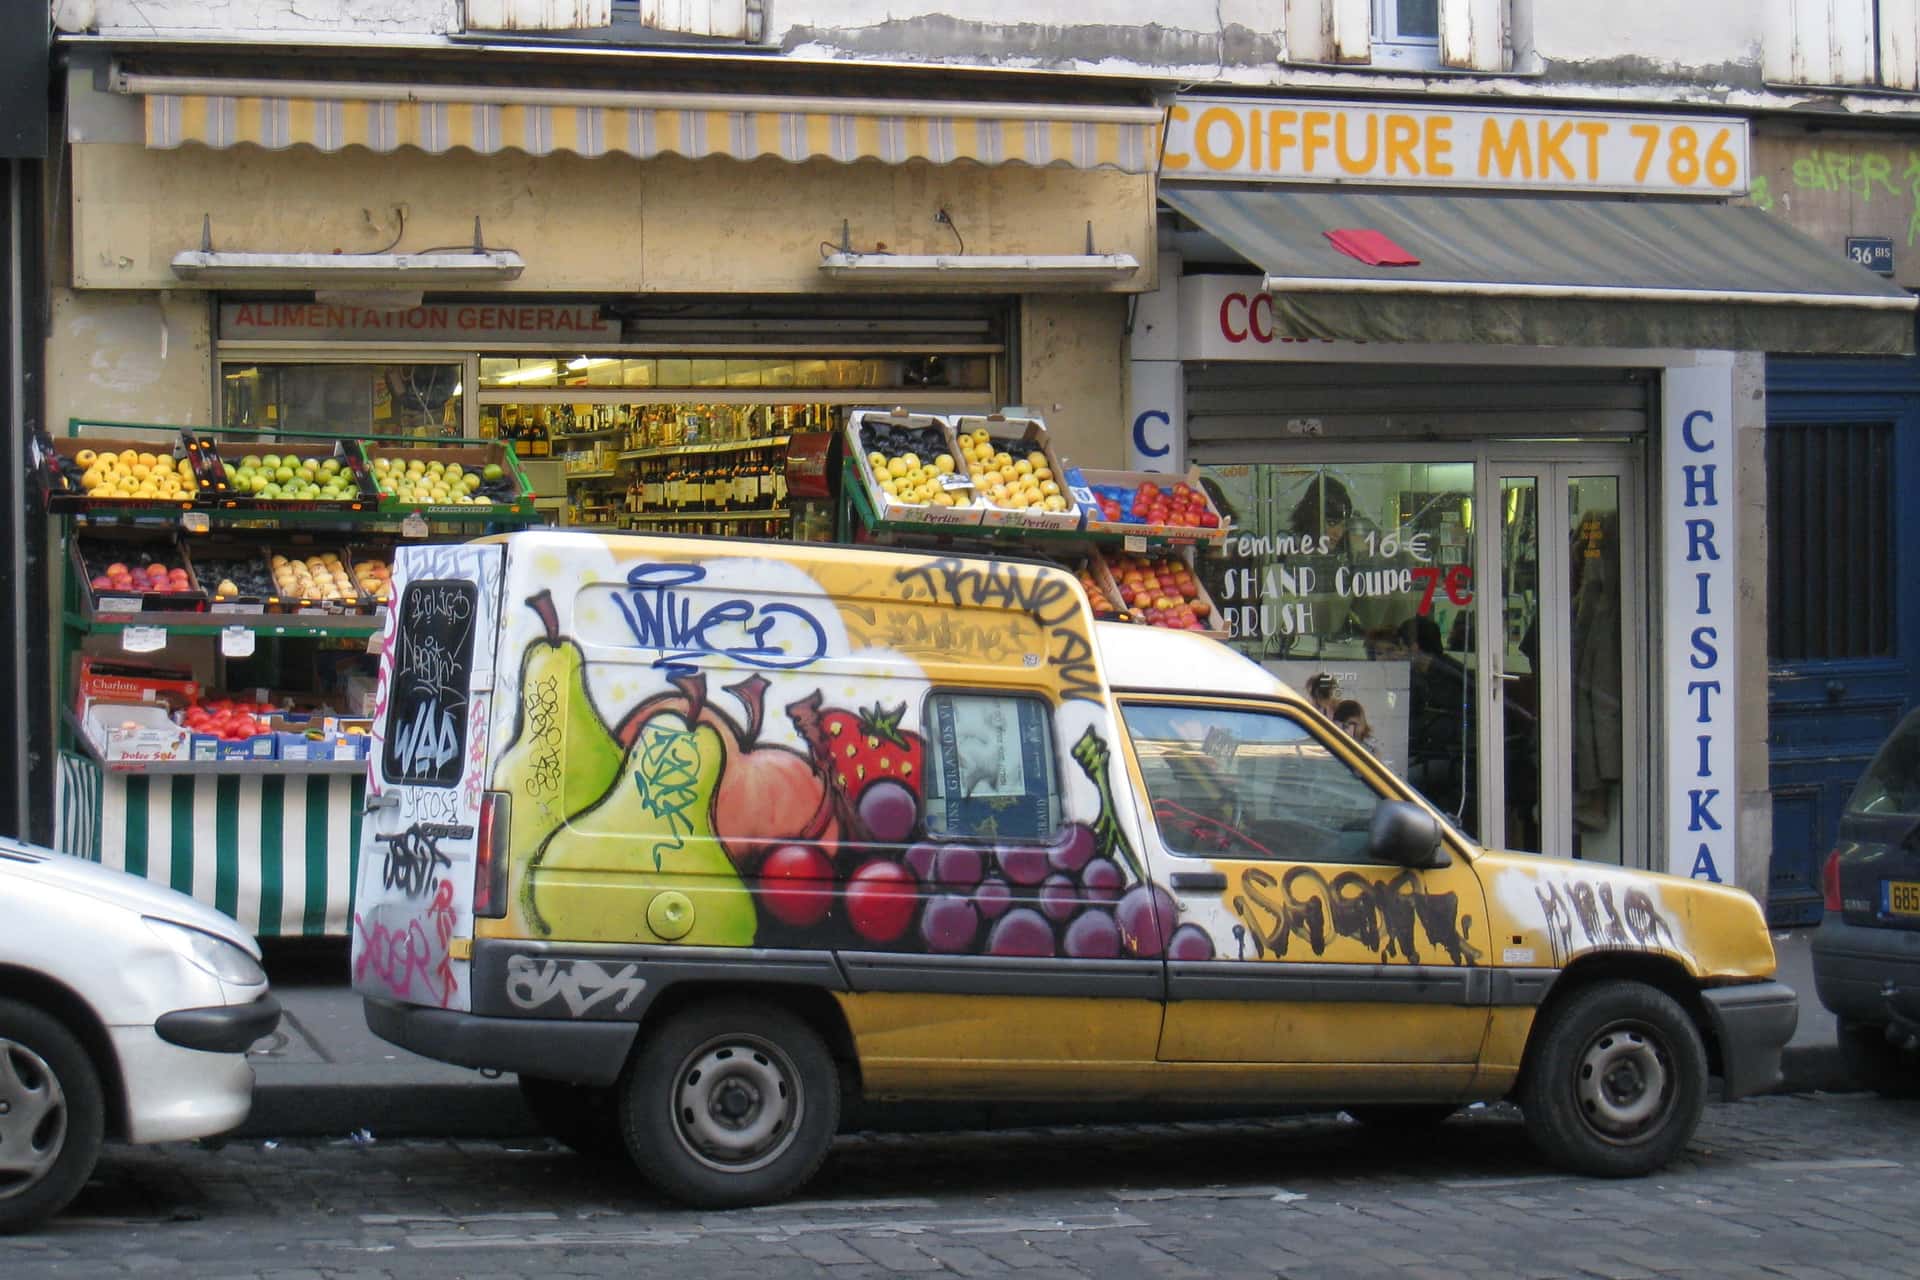 assorted fruit painted on a truck in front of a grocery store in Paris